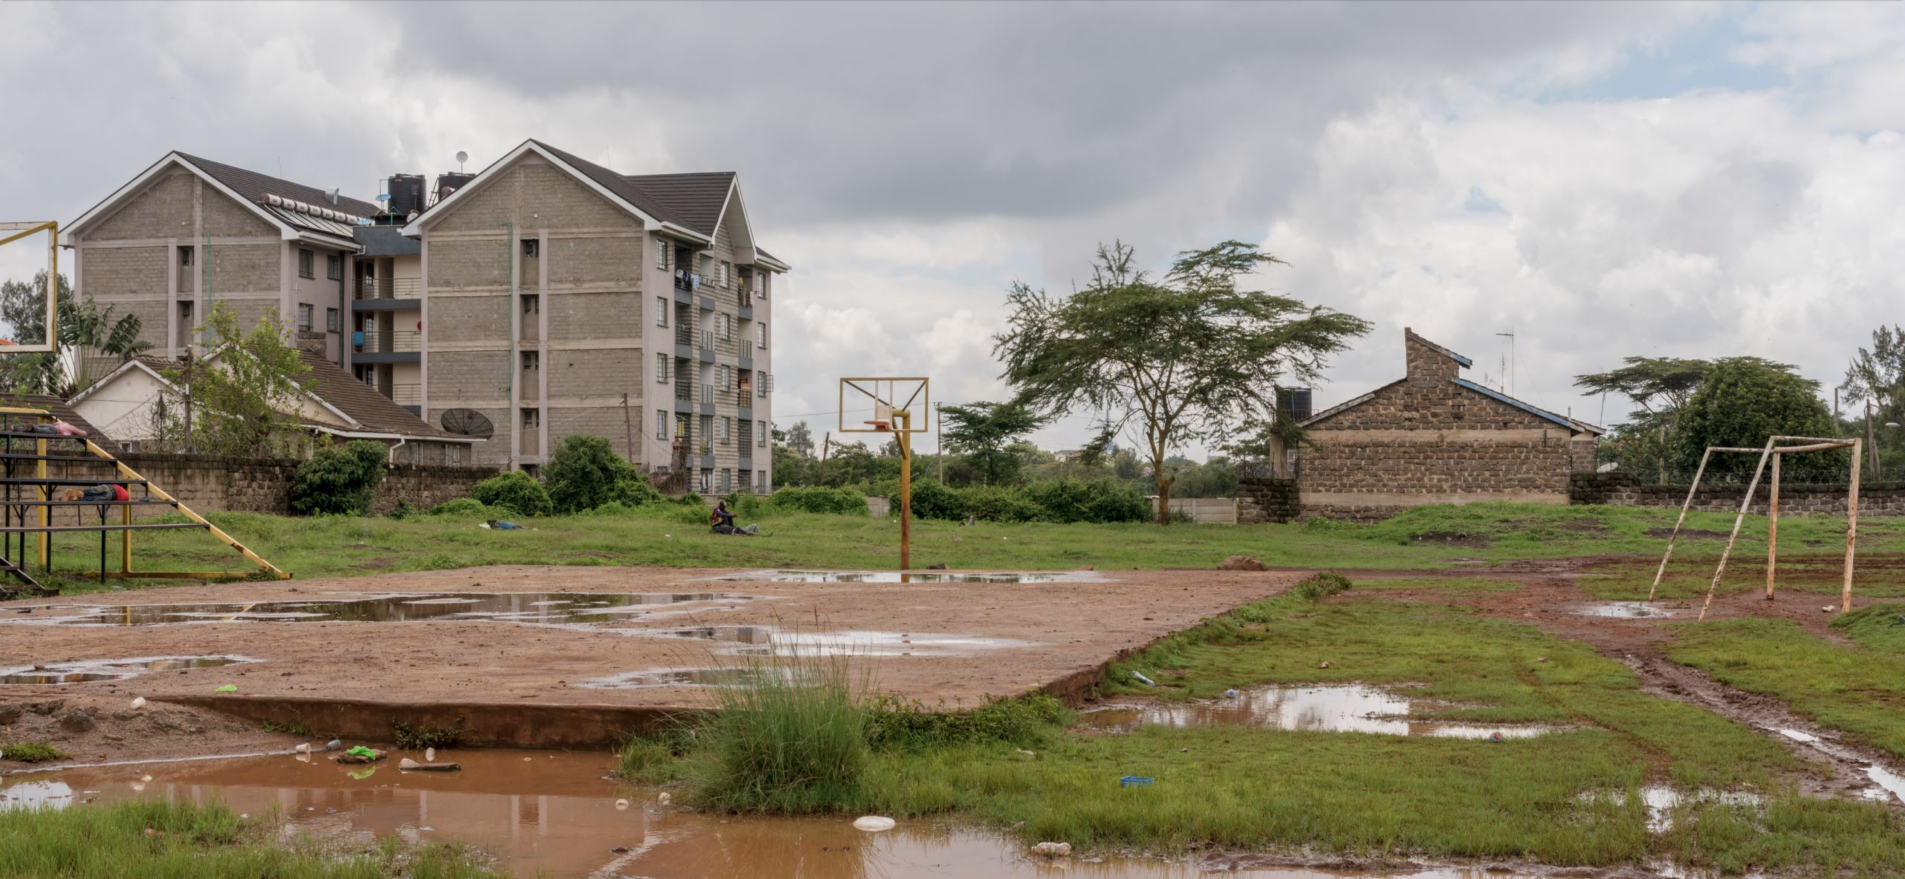 Dilapidated Woodley Field, a former playground and stadium ground, in Nairobi. The projected was reported to the What Went Wrong? survey by several Kibera residents. Image by Peter DiCampo. Kenya, 2018.